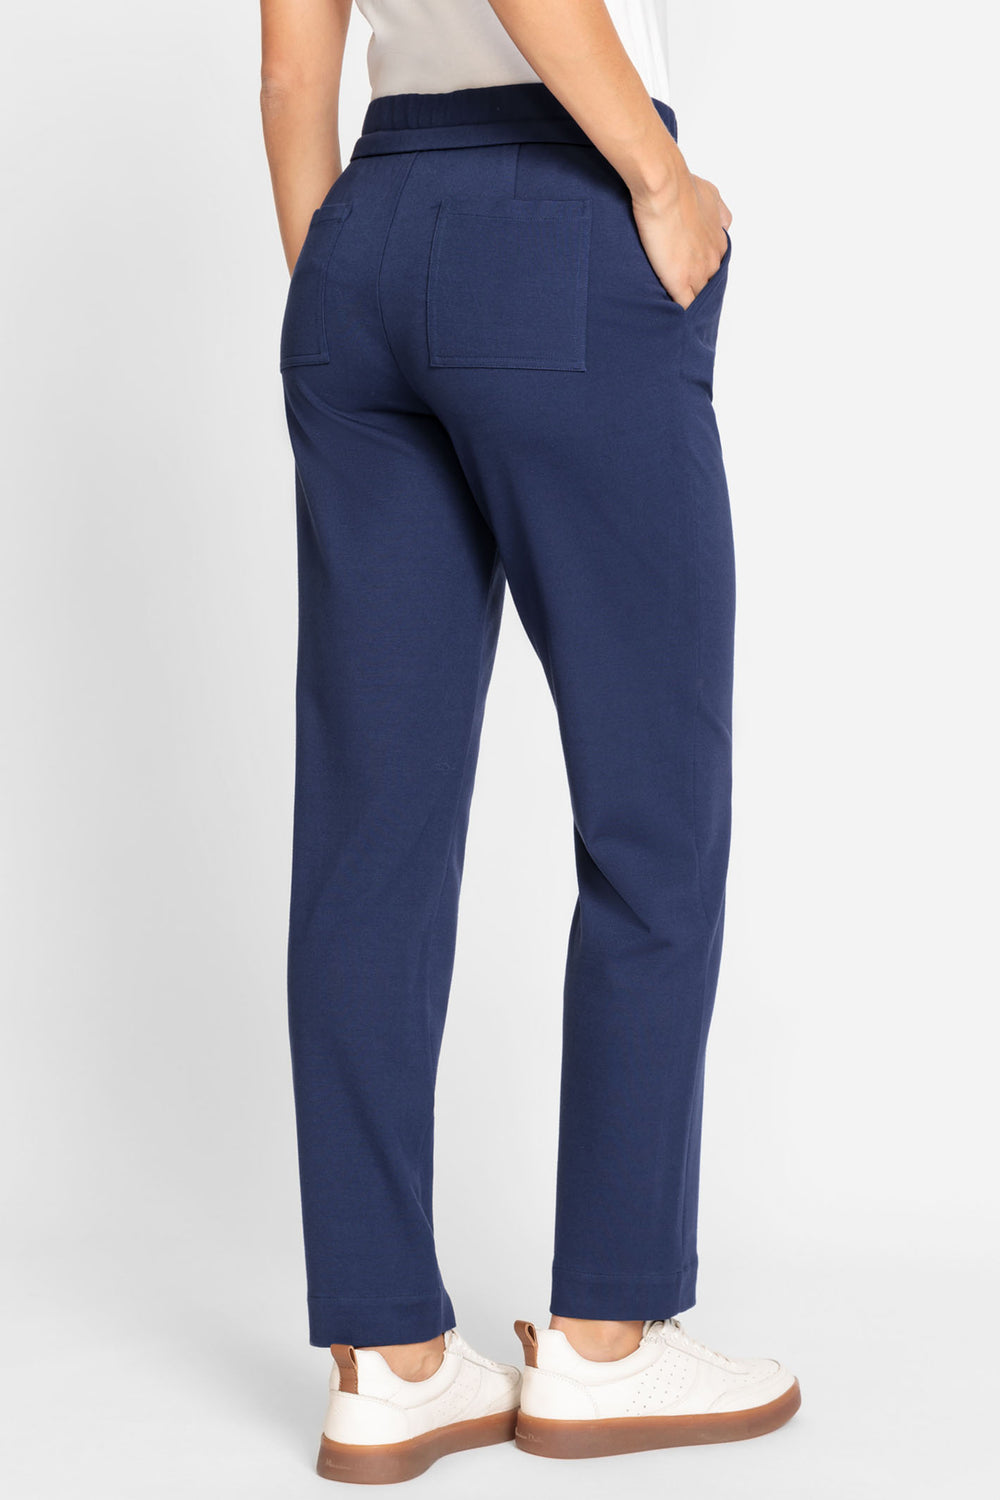 Olsen 14002017 40152 Night Blue Drawstring Waist Jersey Trousers - Experience Boutique